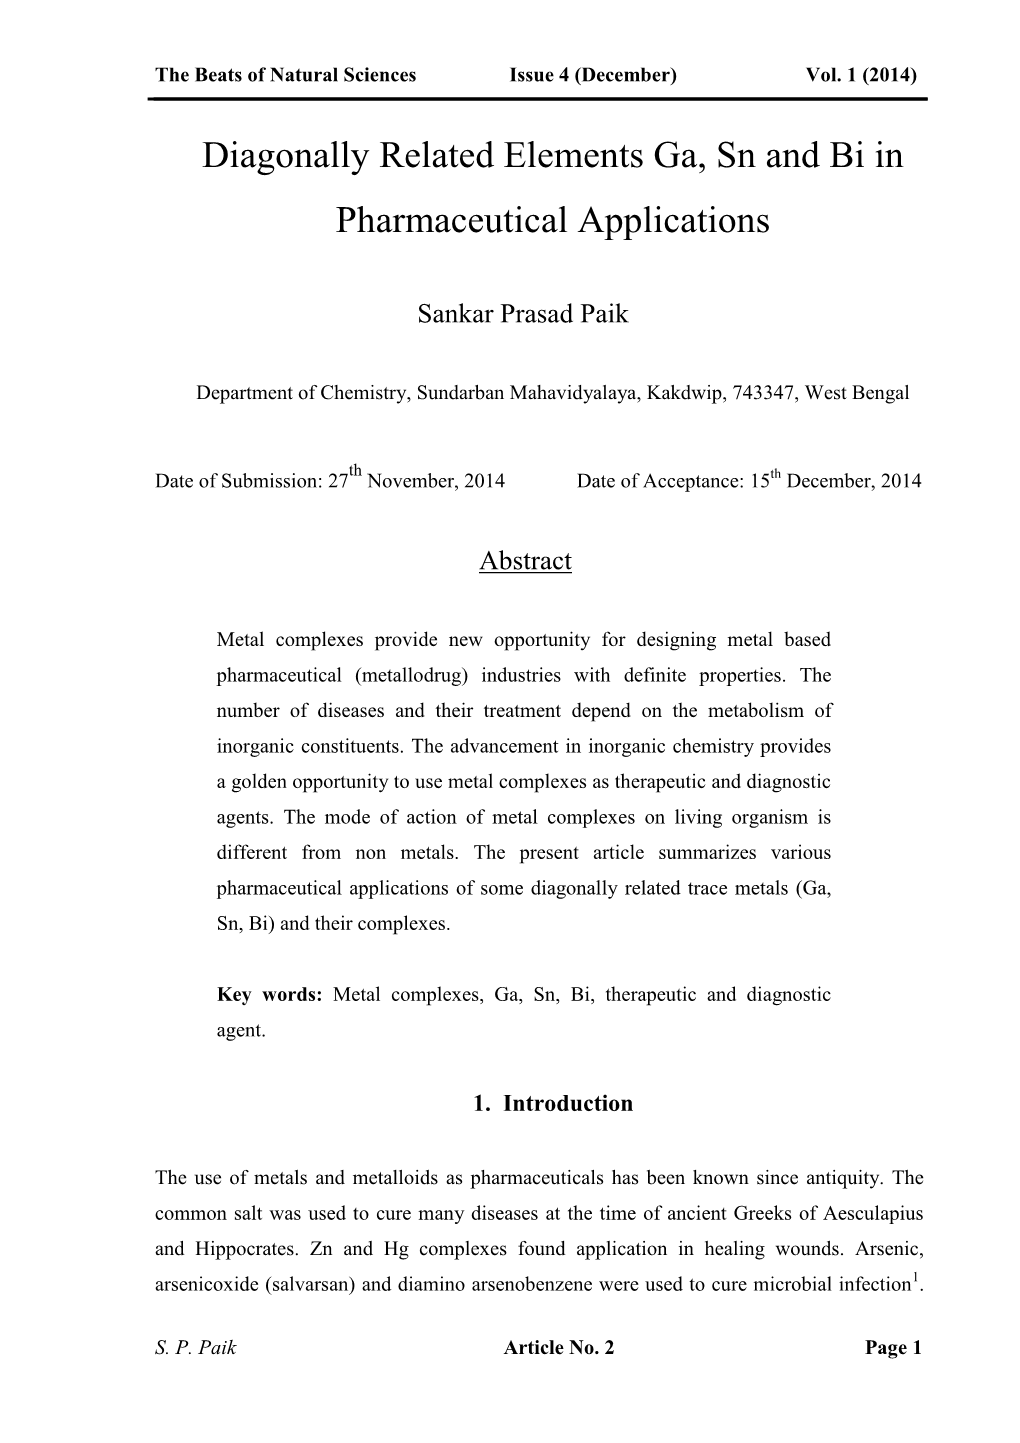 Diagonally Related Elements Ga, Sn and Bi in Pharmaceutical Applications